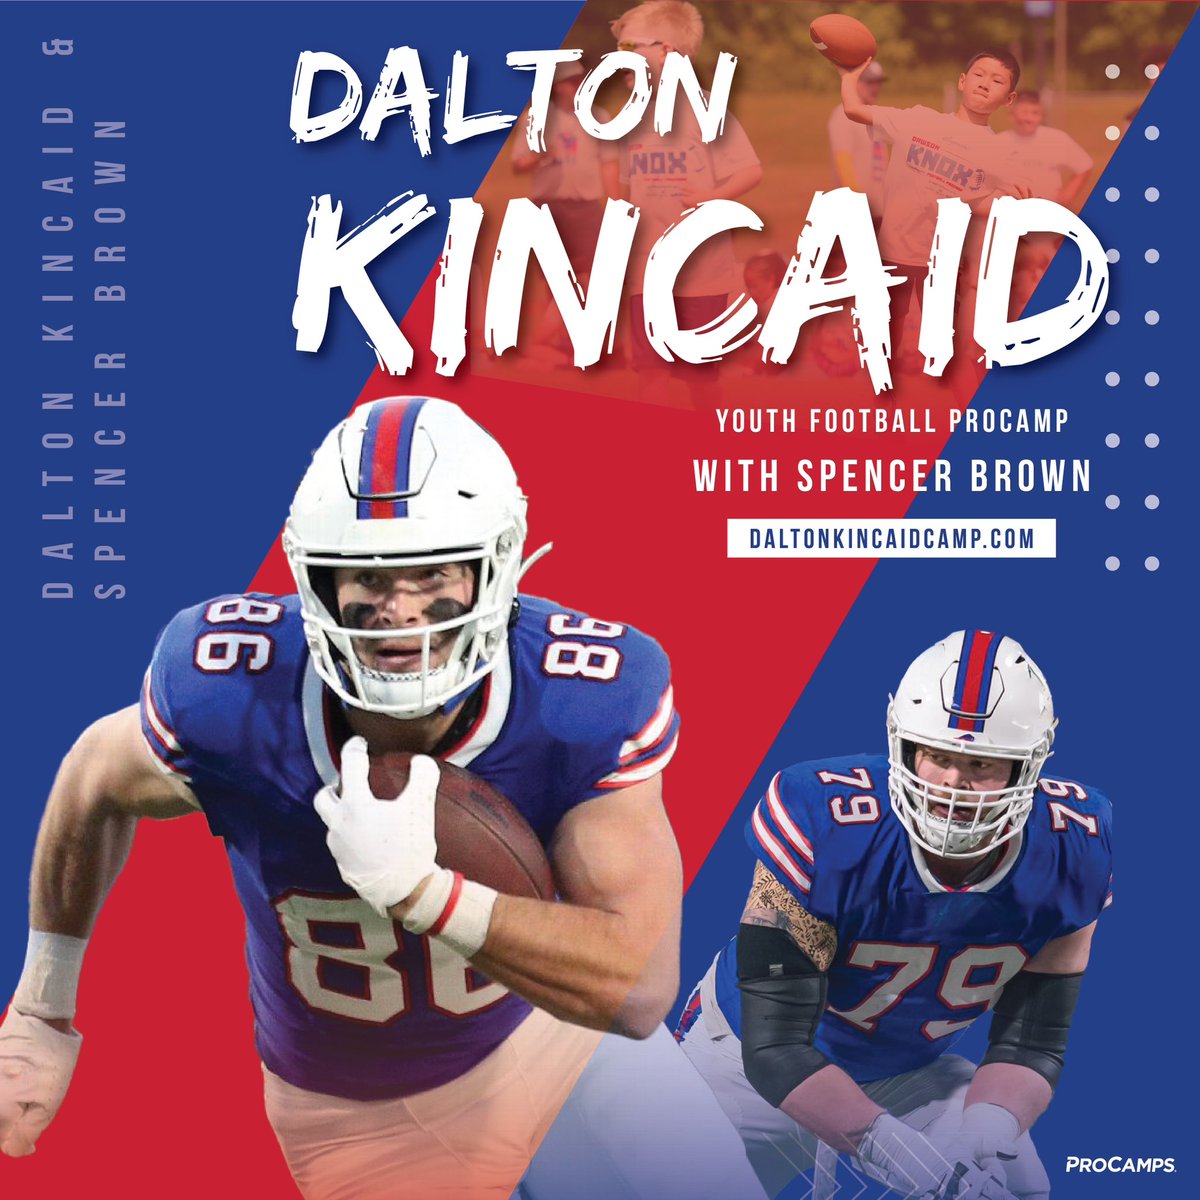 Ready to go ProCamp-ing with Buffalo’s dynamic Duo!? 🔥 🏈 Right here, right now! Registration for the Dalton Kincaid Youth Football ProCamp with Spencer Brown is OPEN. Spots are expected to fill quickly.   You won’t want to miss this one! Visit DaltonKincaidCamp.com to sign